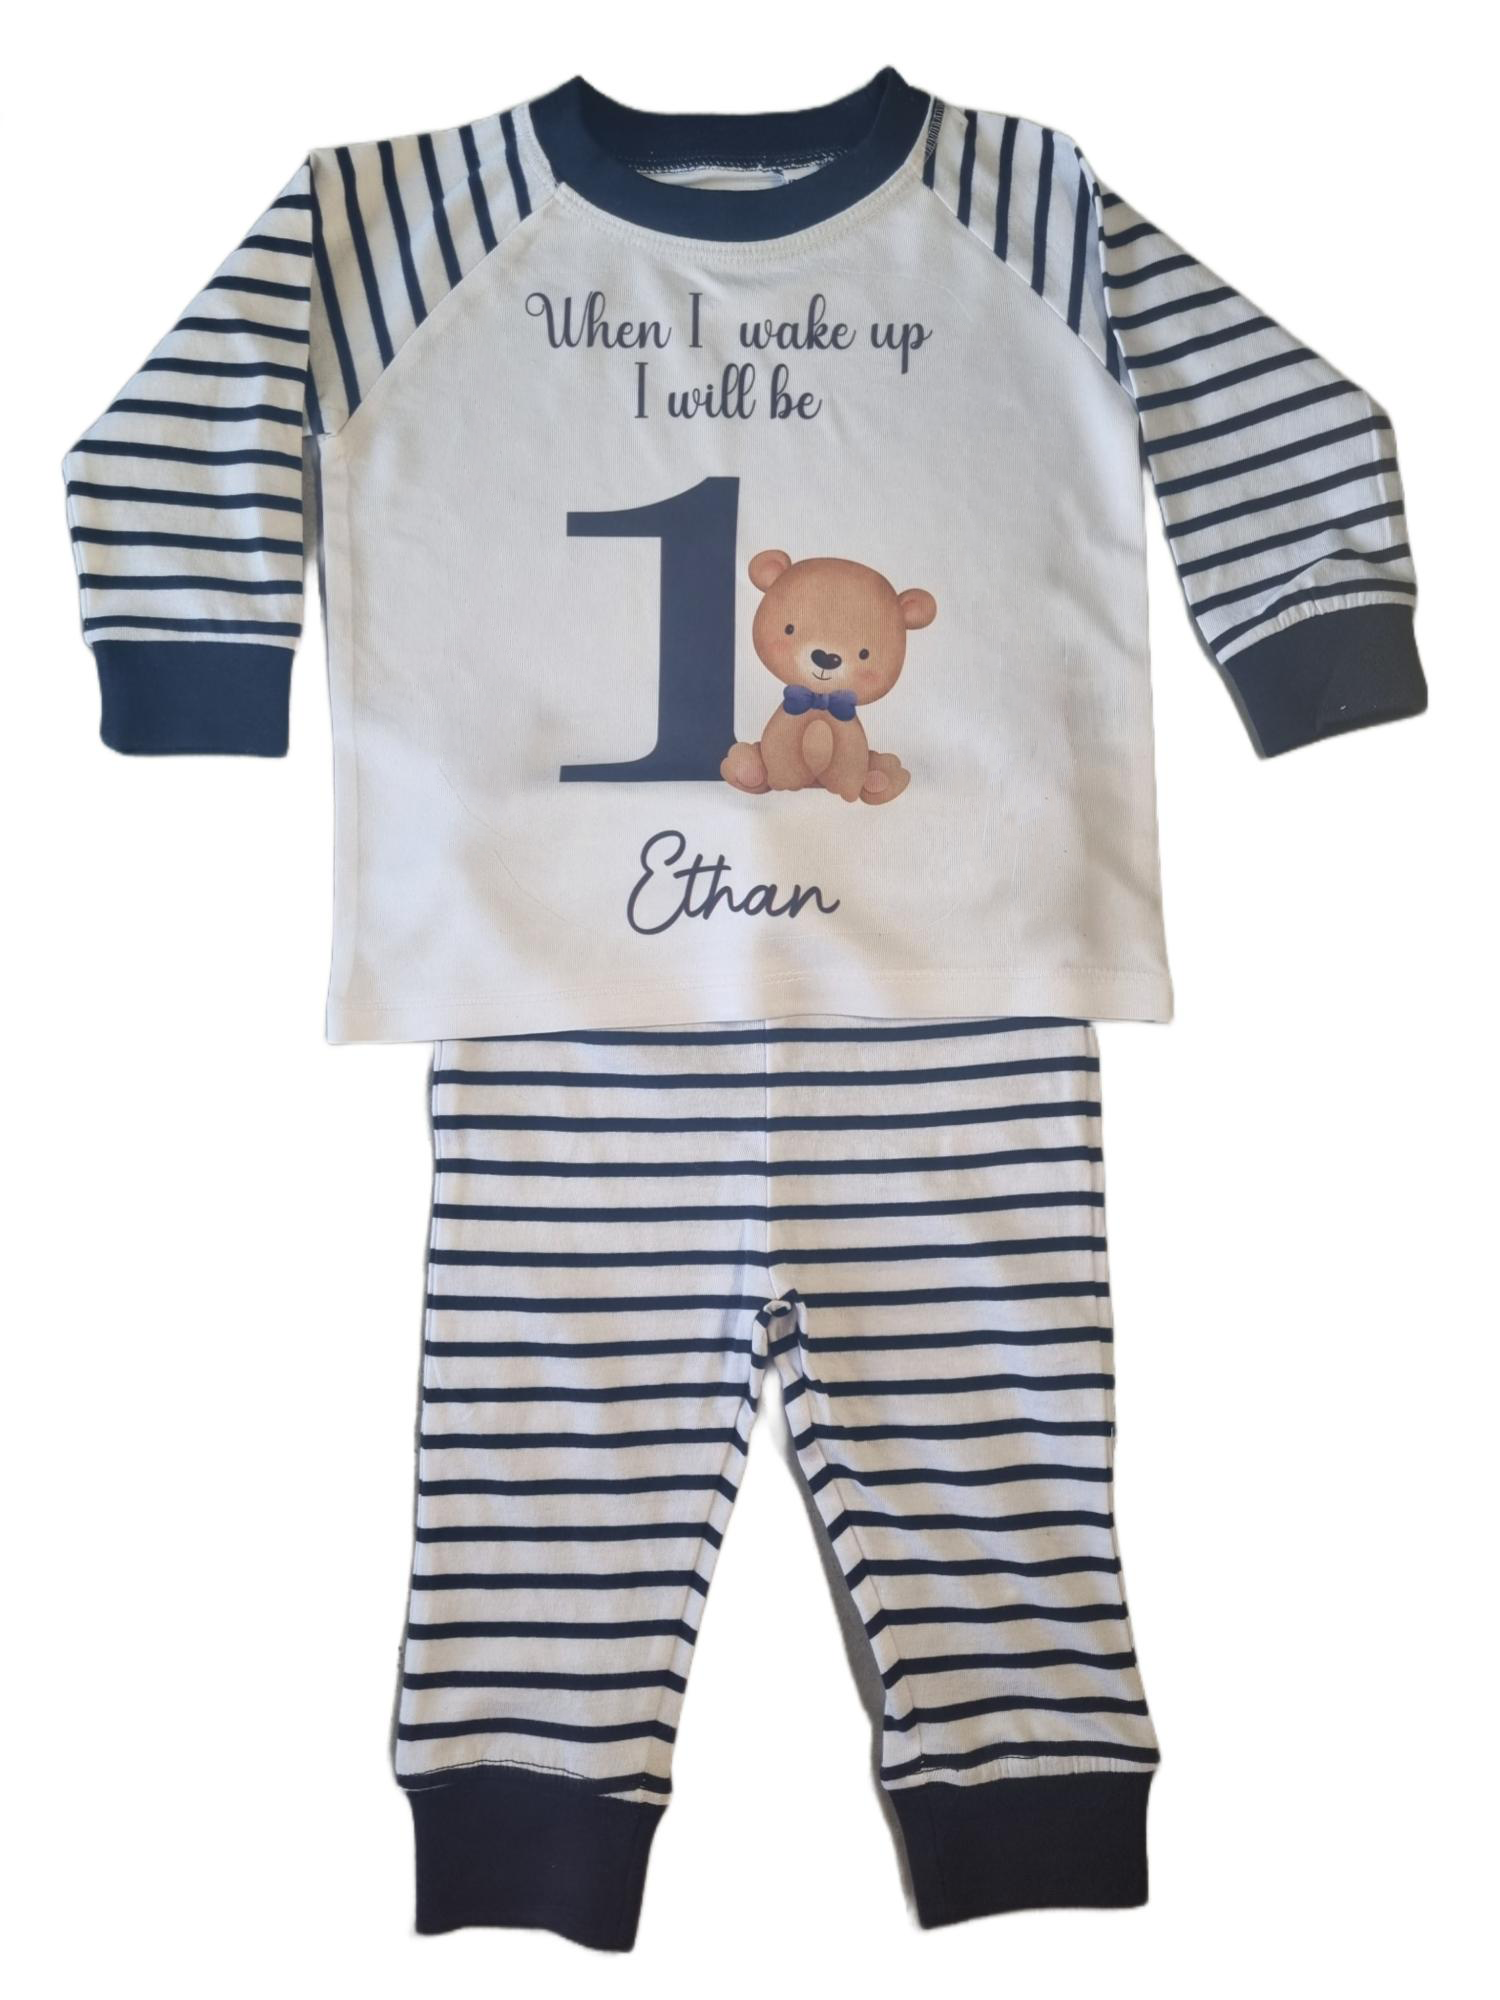 'When I wake up I will be' 1 navy and white stripe pyjamas with bear and blue bow tie, includes child's name, flat top and flat bottoms